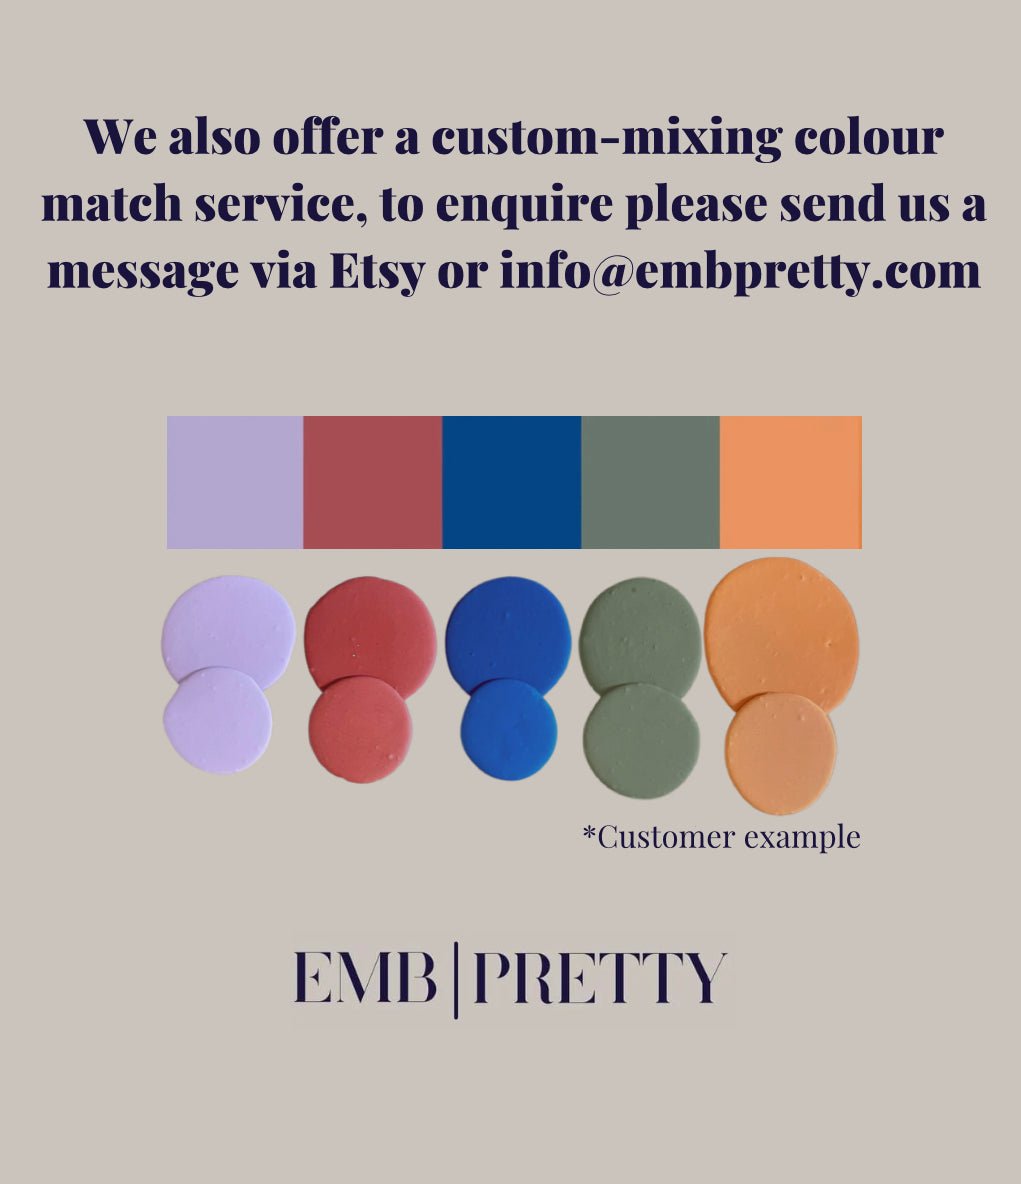 50ml Hand-blended pigments - EMB Pretty